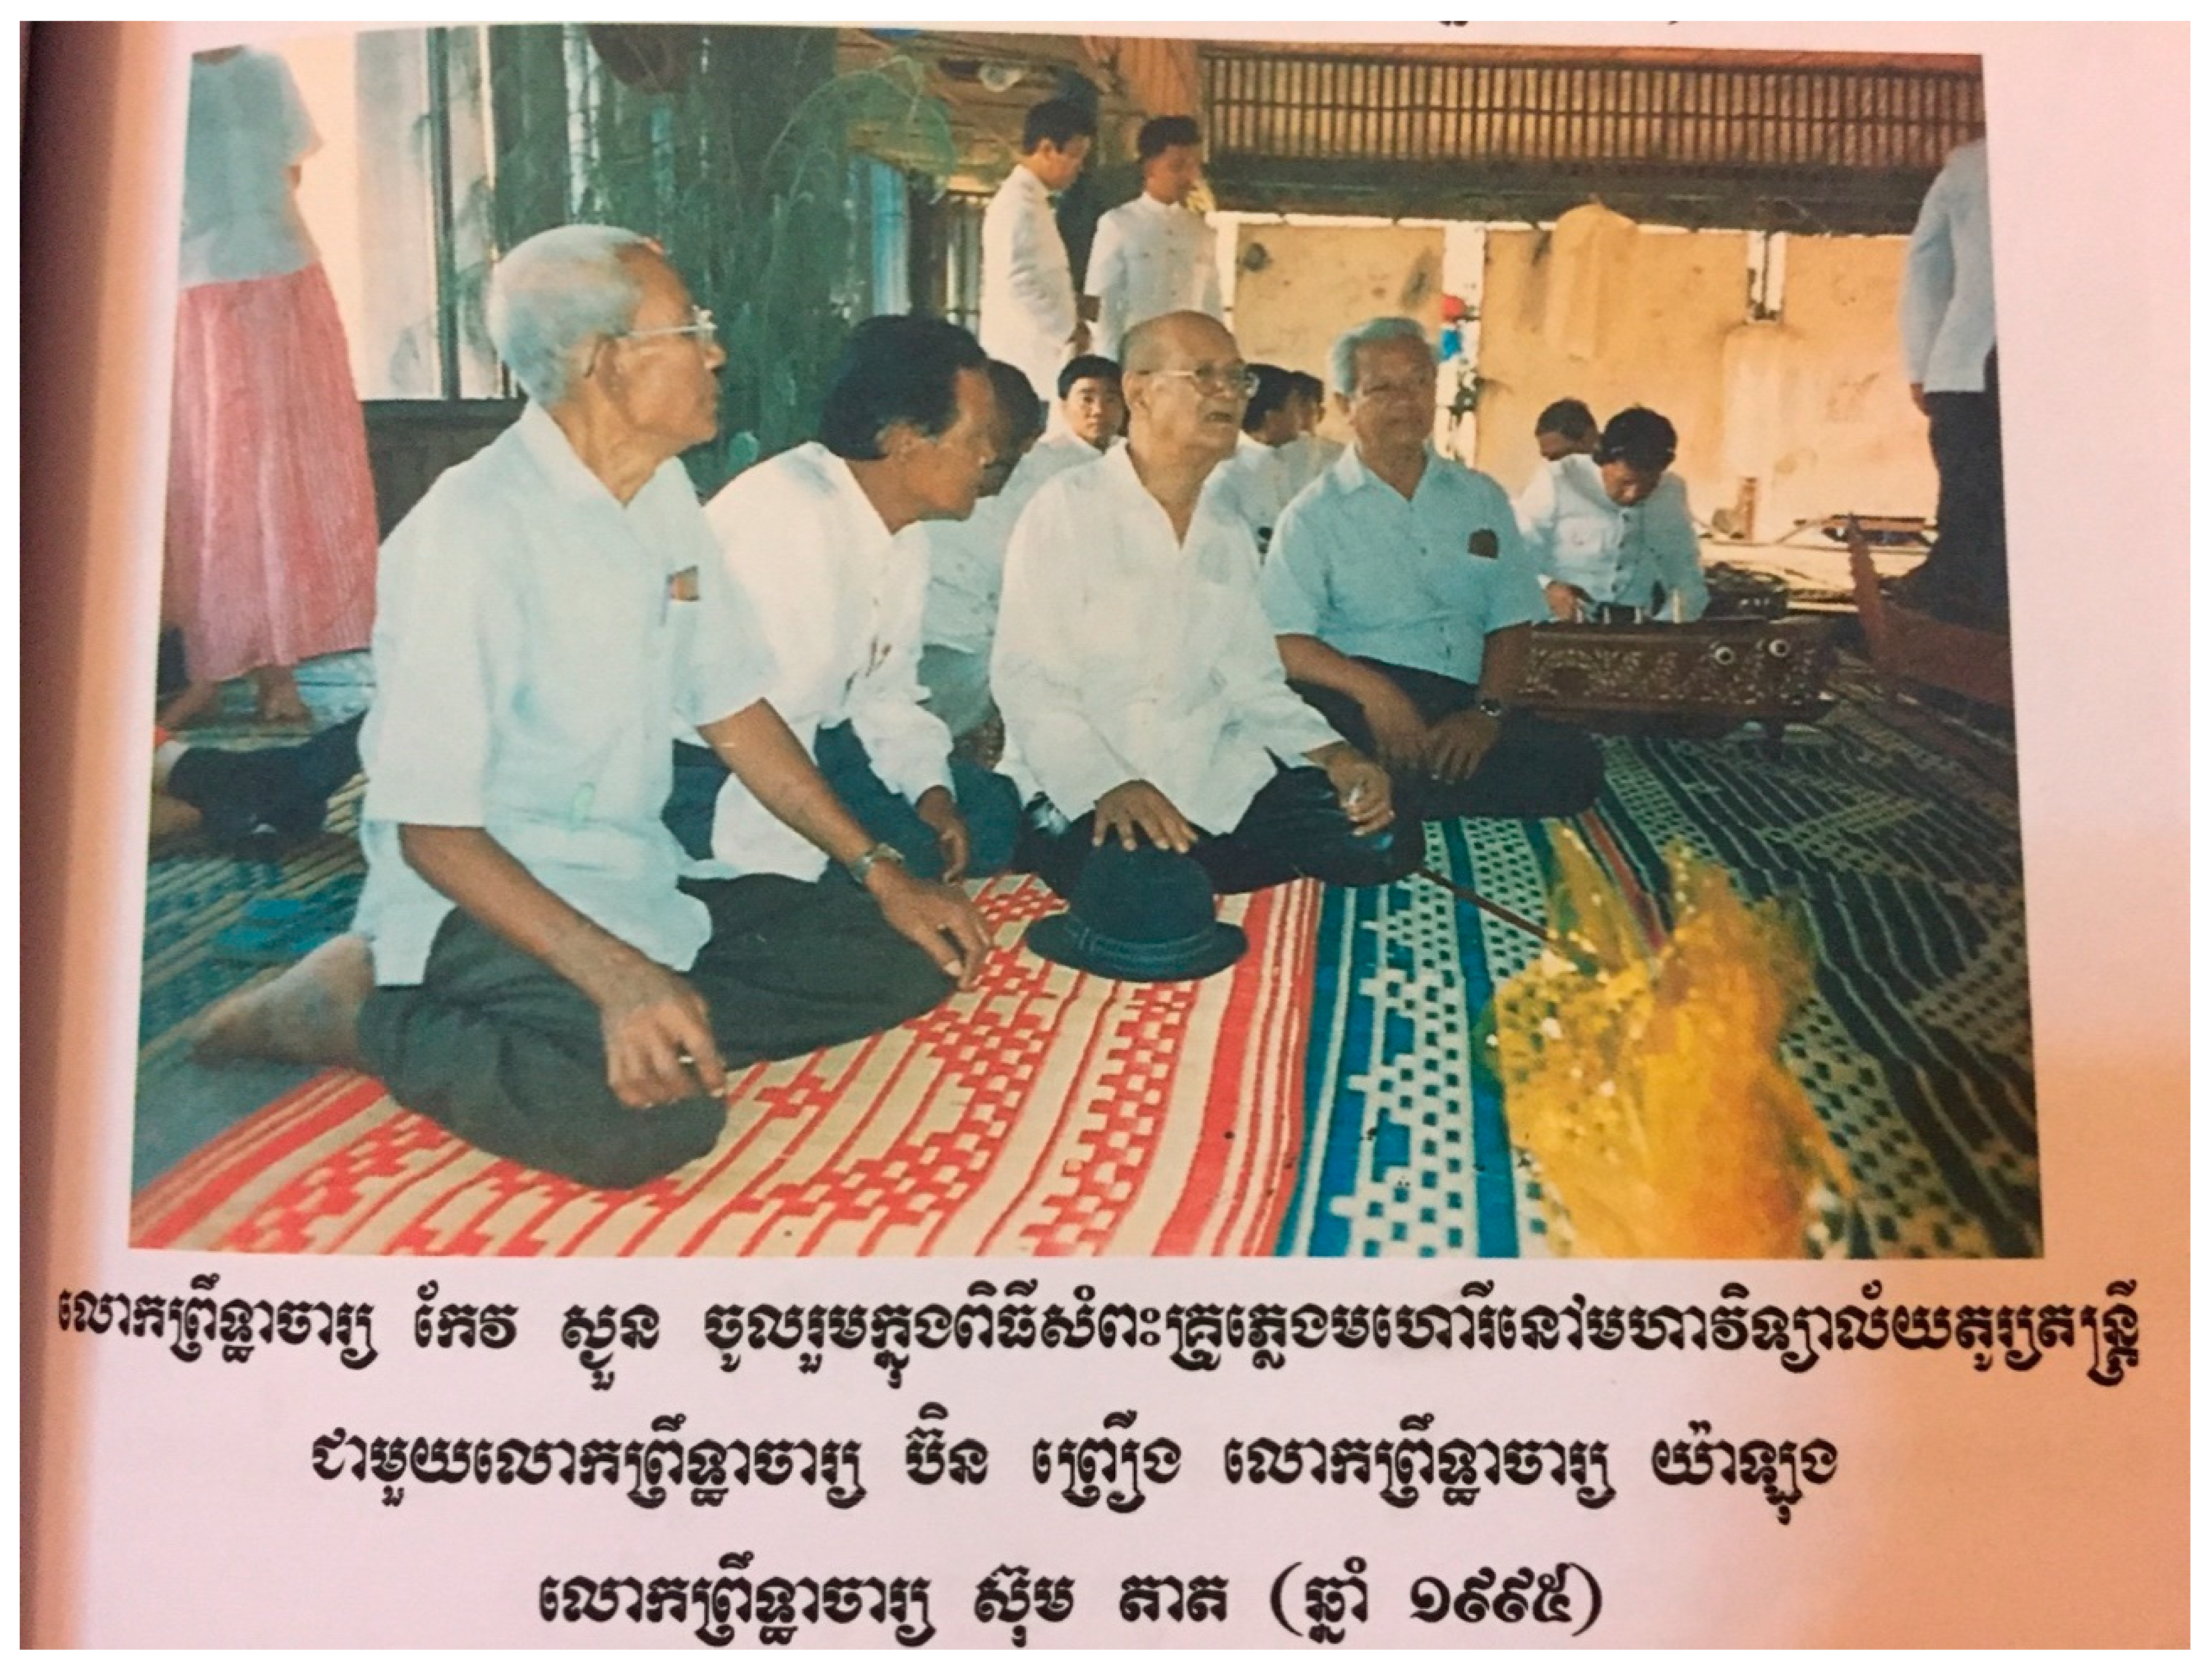 Religions Free Full-Text Popular Songs, Melodies from the Dead Moving beyond Historicism with the Buddhist Ethics and Aesthetics of Pin Peat and Cambodian Hip pic